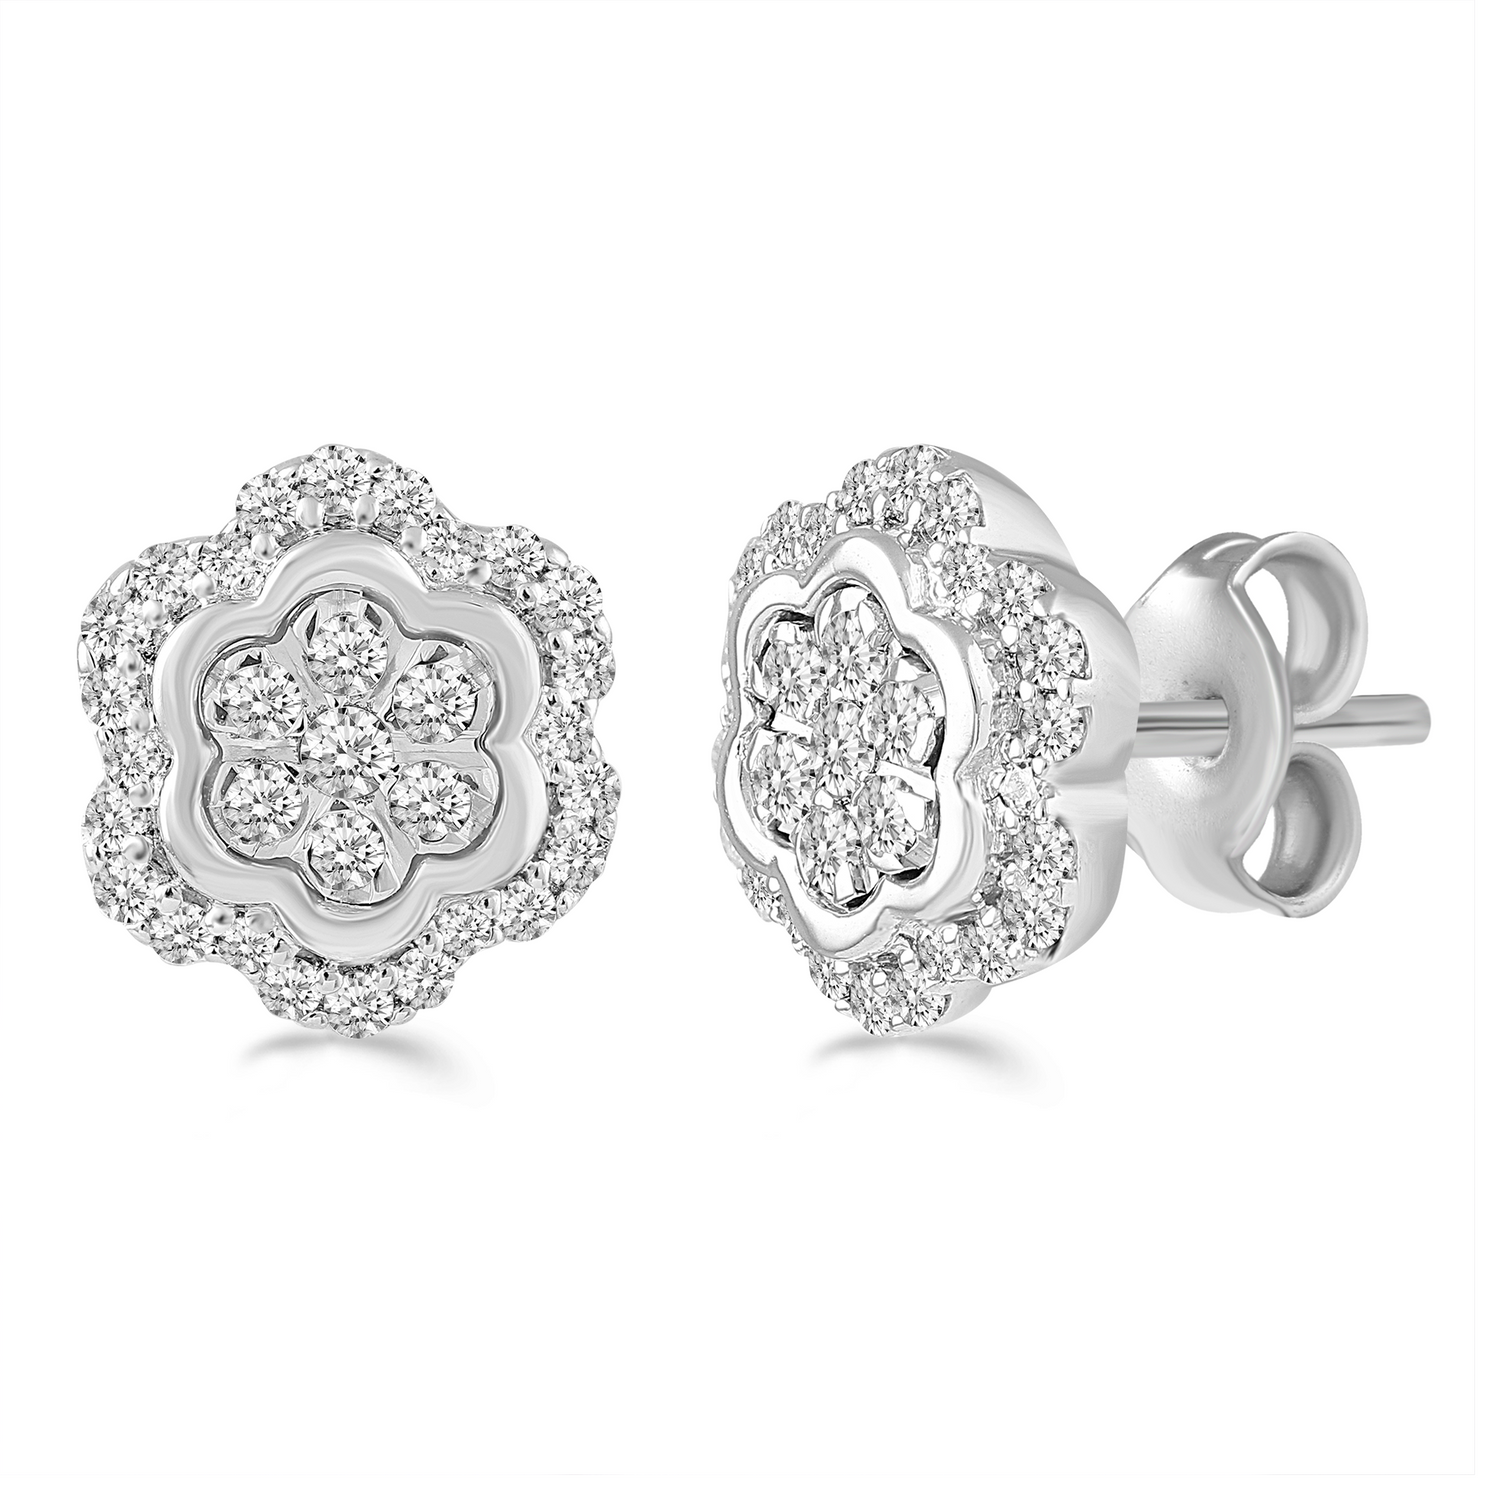 1/2CTTW Diamond Floral Cluster Stud Earring in Sterling Silver